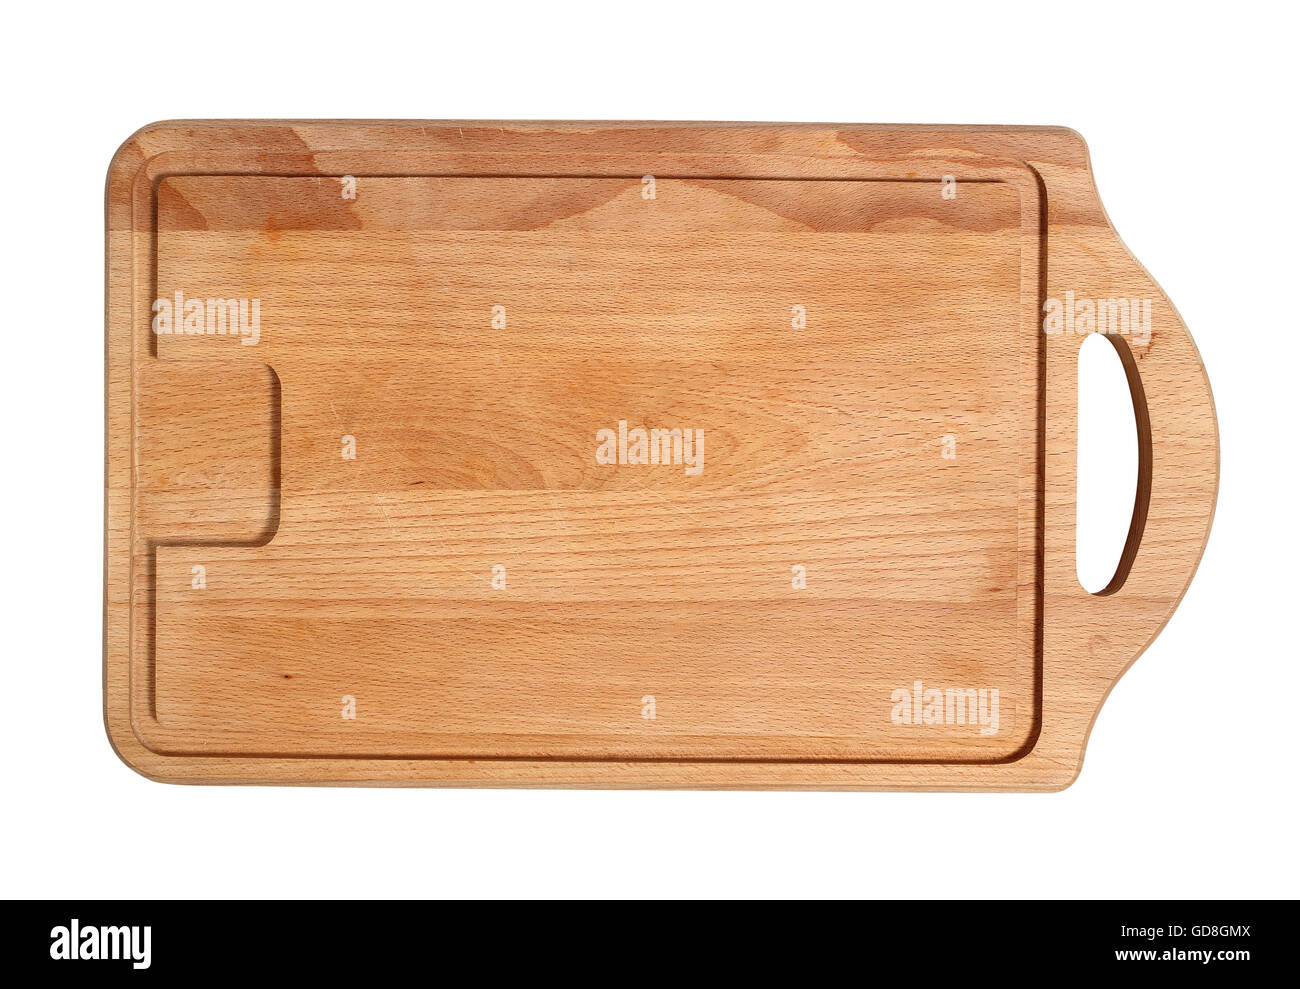 Wooden cutting board. Isolated with clipping path. Stock Photo